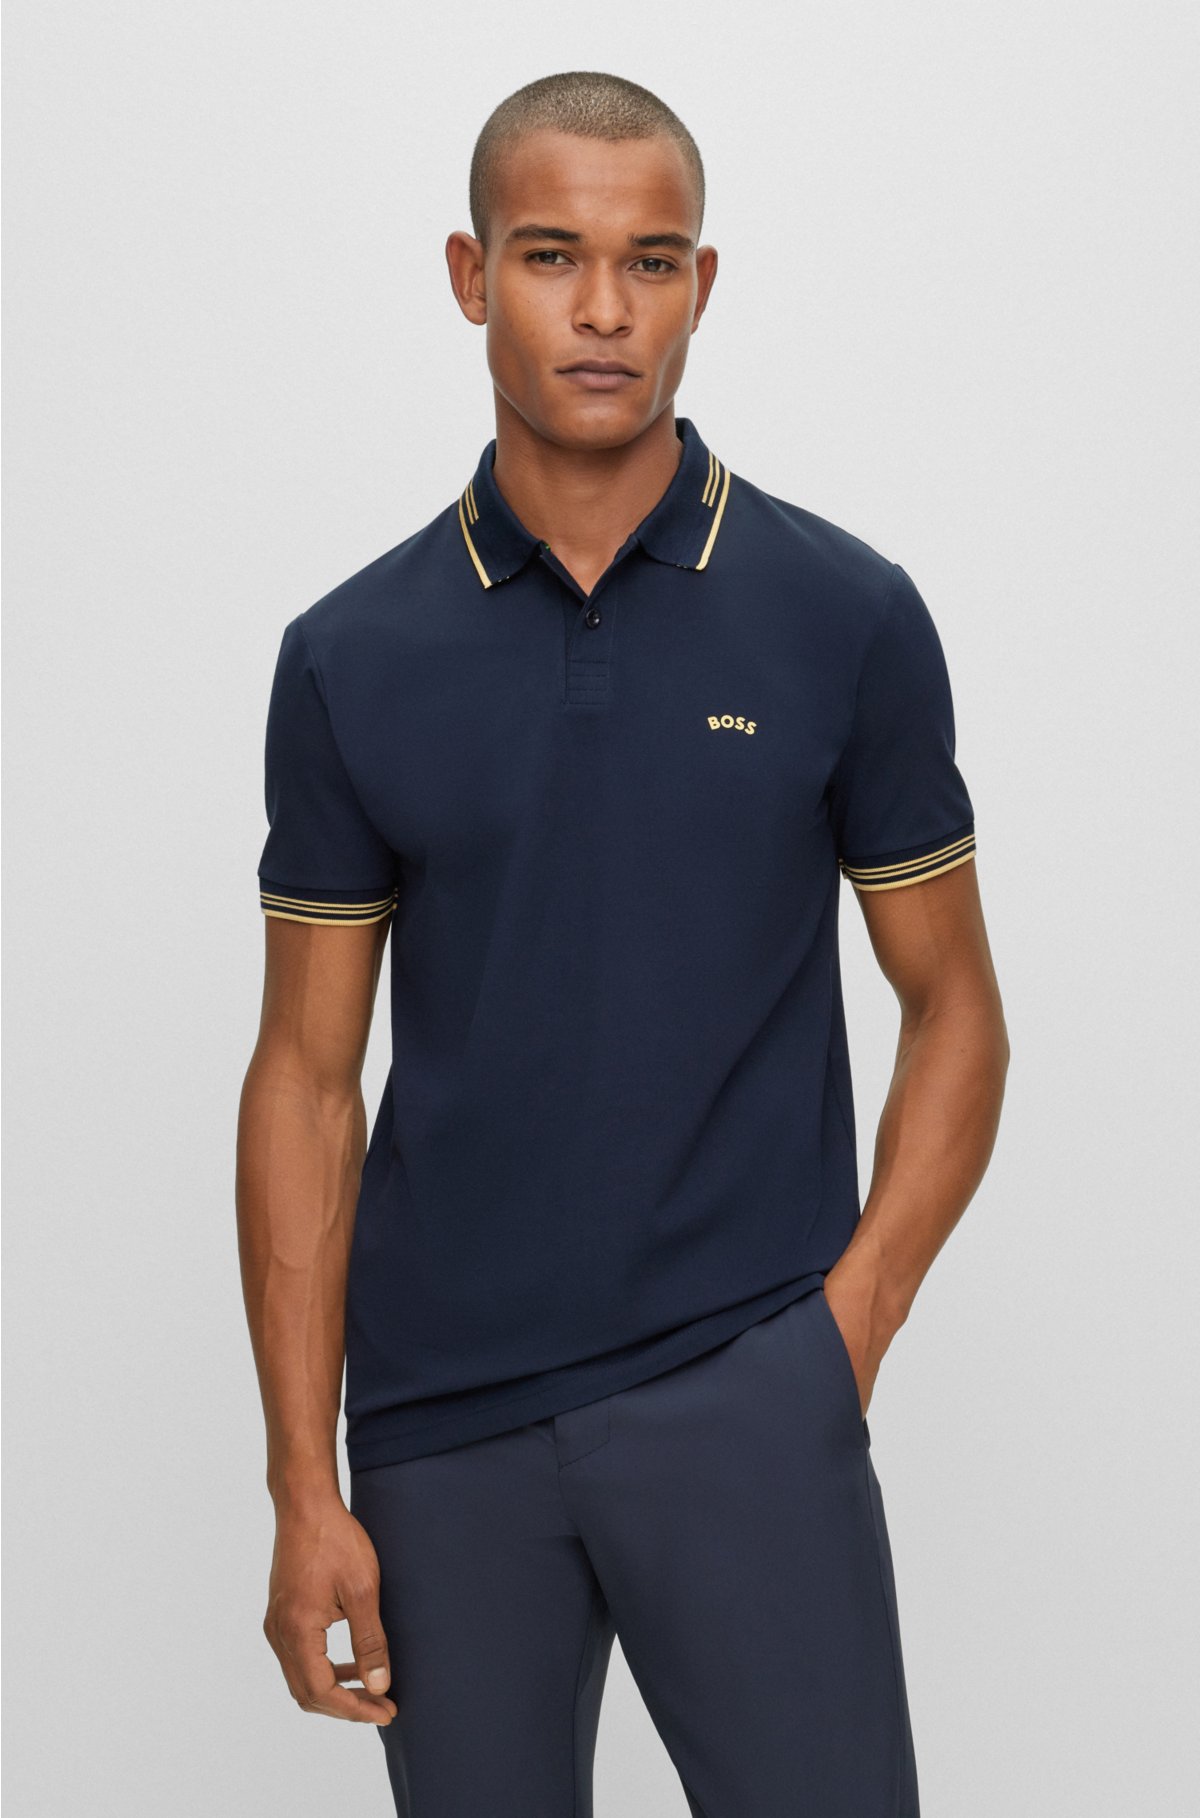 teugels Brengen media BOSS - Stretch-cotton slim-fit polo shirt with curved logo